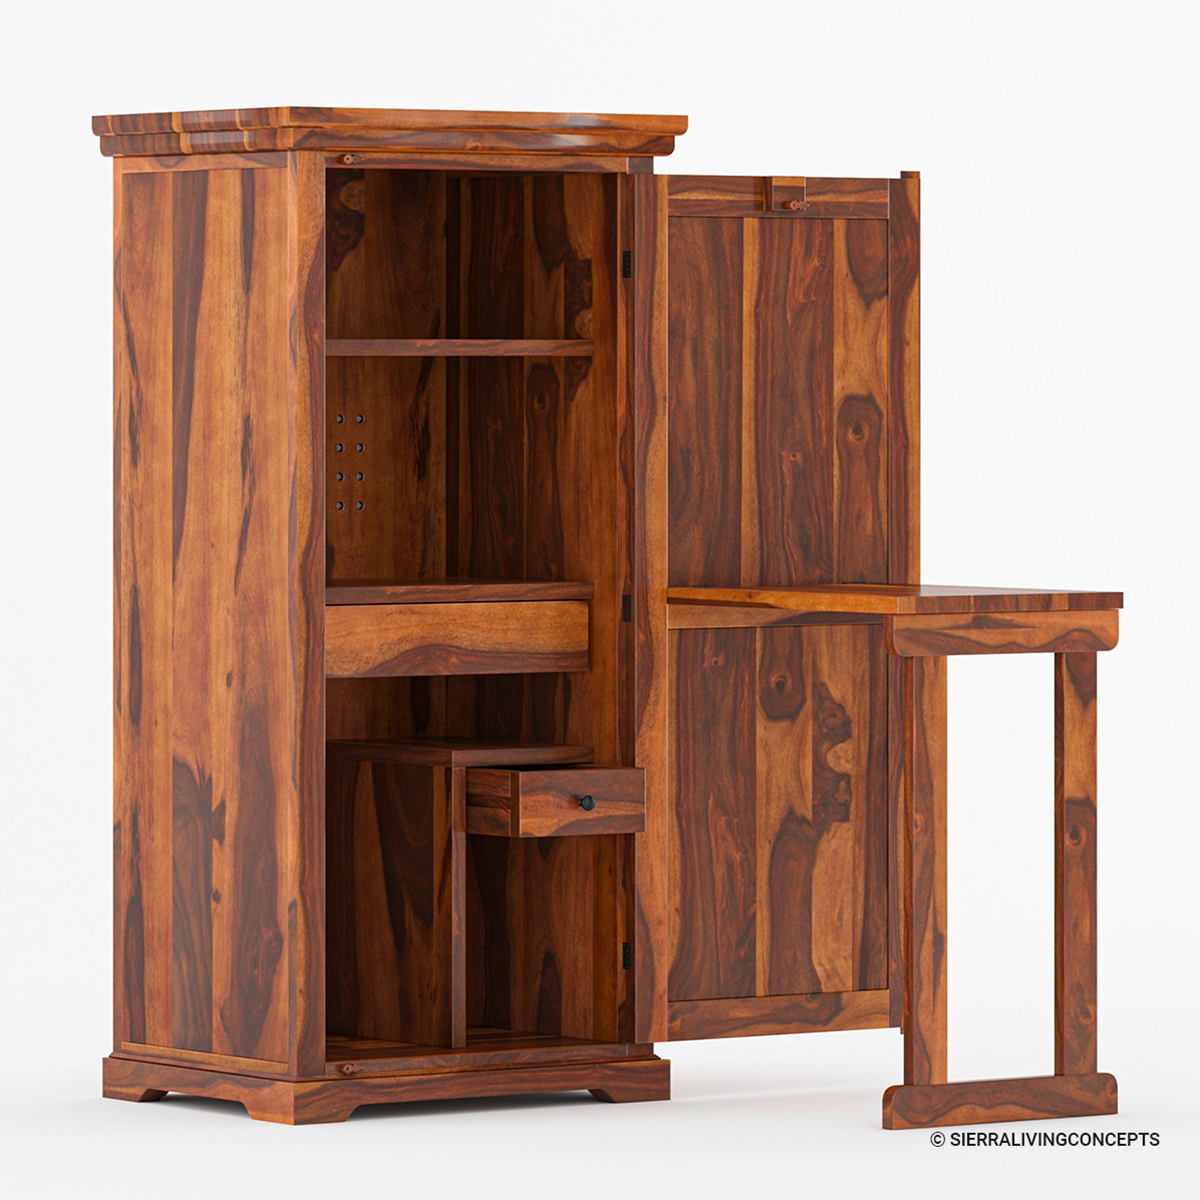 https://www.sierralivingconcepts.com/images/thumbs/0391145_space-saving-solid-wood-folding-armoire-desk-with-storage-cabinet.jpeg